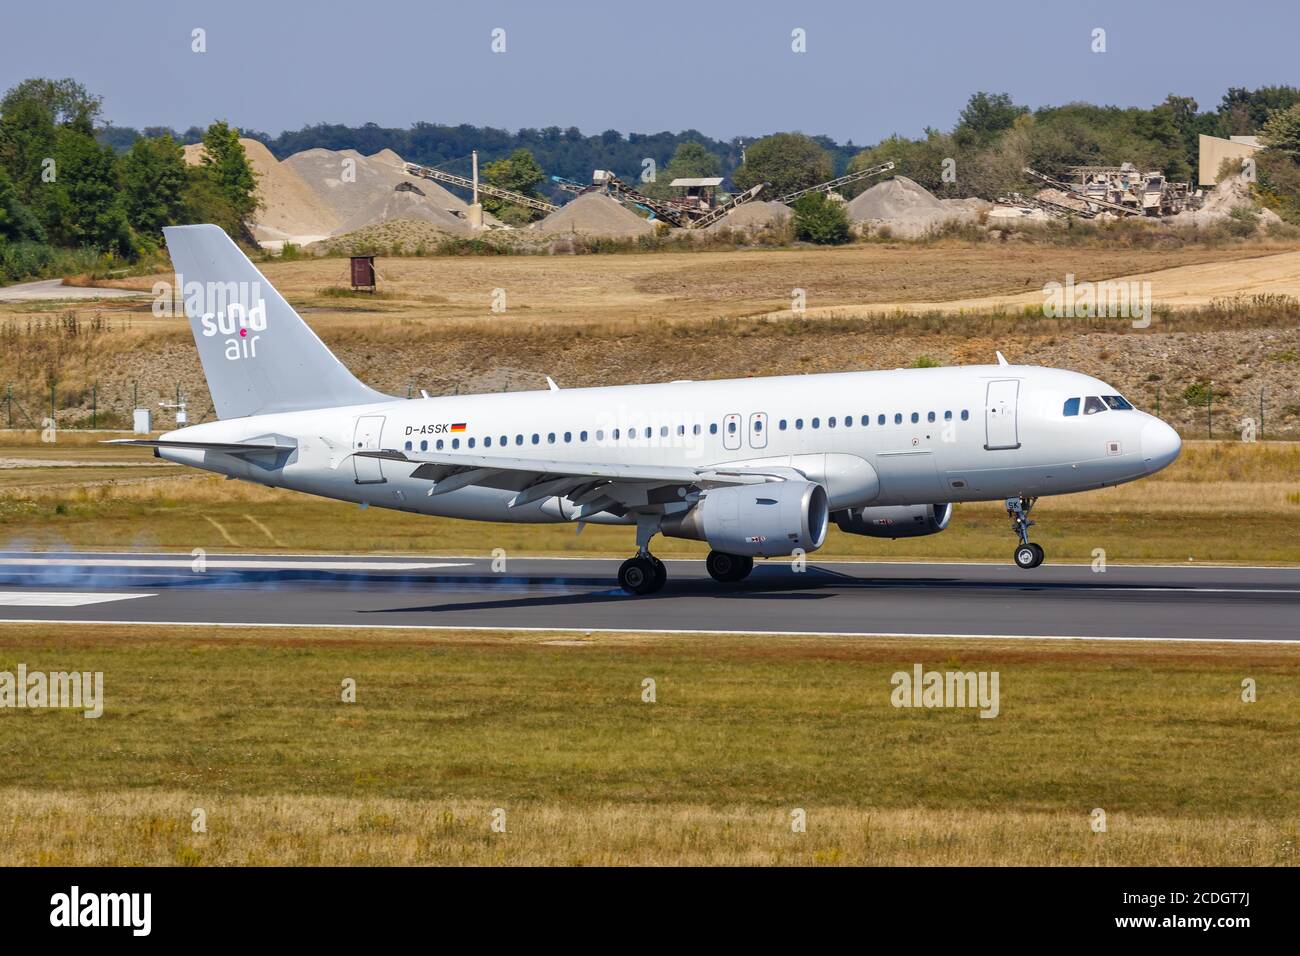 Kassel, Germany - August 8, 2020: Sundair Airbus A319 airplane at Kassel  Calden Airport (KSF) in Germany. Airbus is a European aircraft manufacturer  b Stock Photo - Alamy